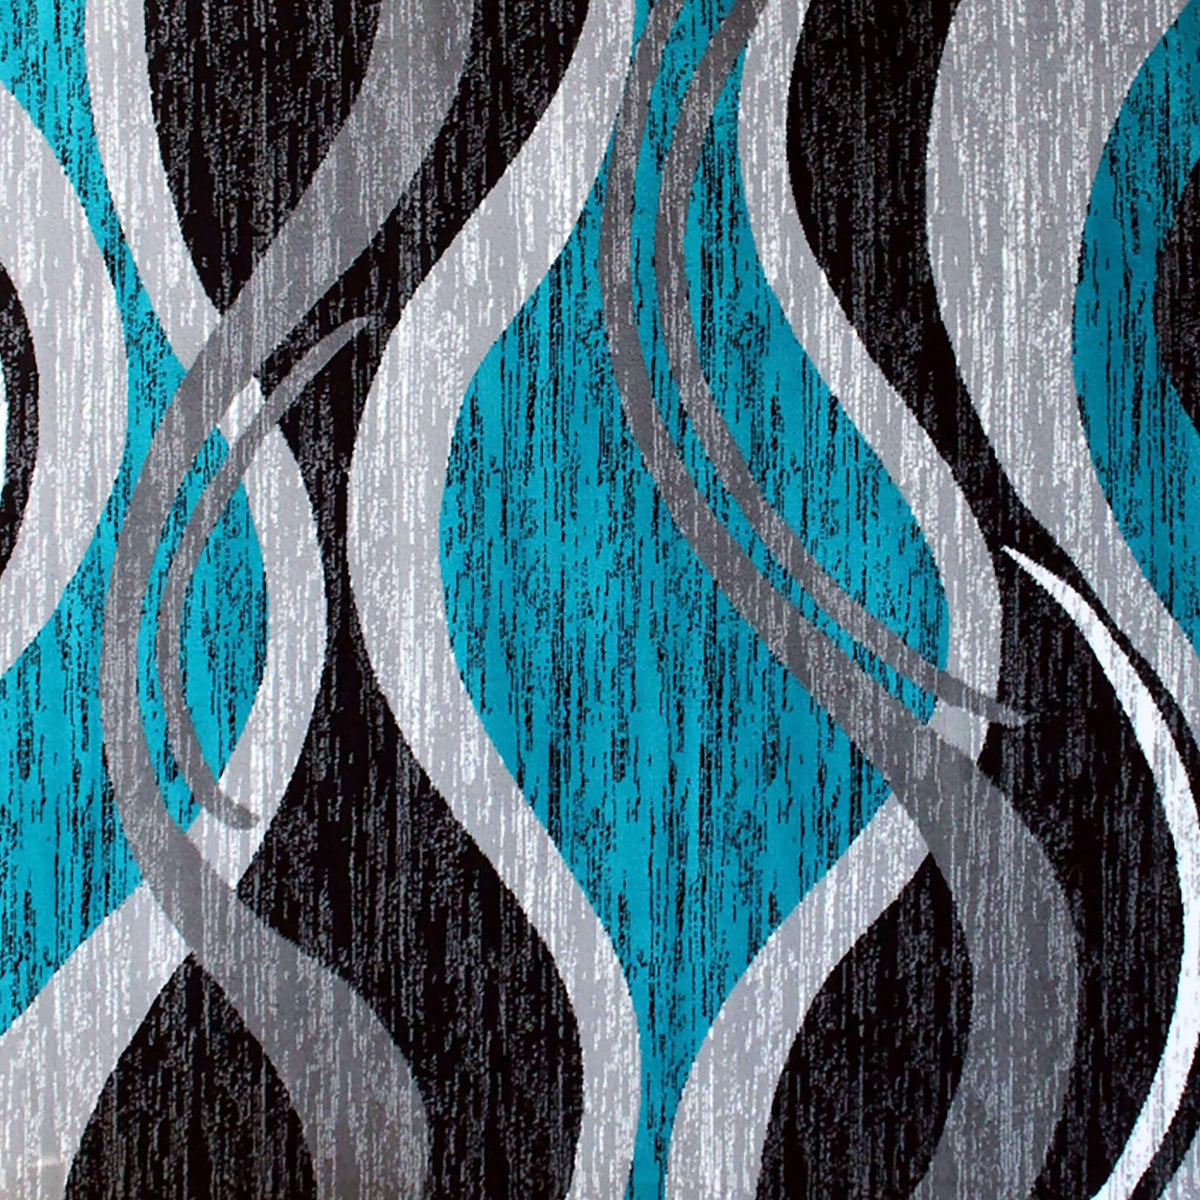 Turquoise,5' x 7' |#| Modern Ripple Abstract Area Rug - Turquoise, Black, White, & Gray - 5' x 7'